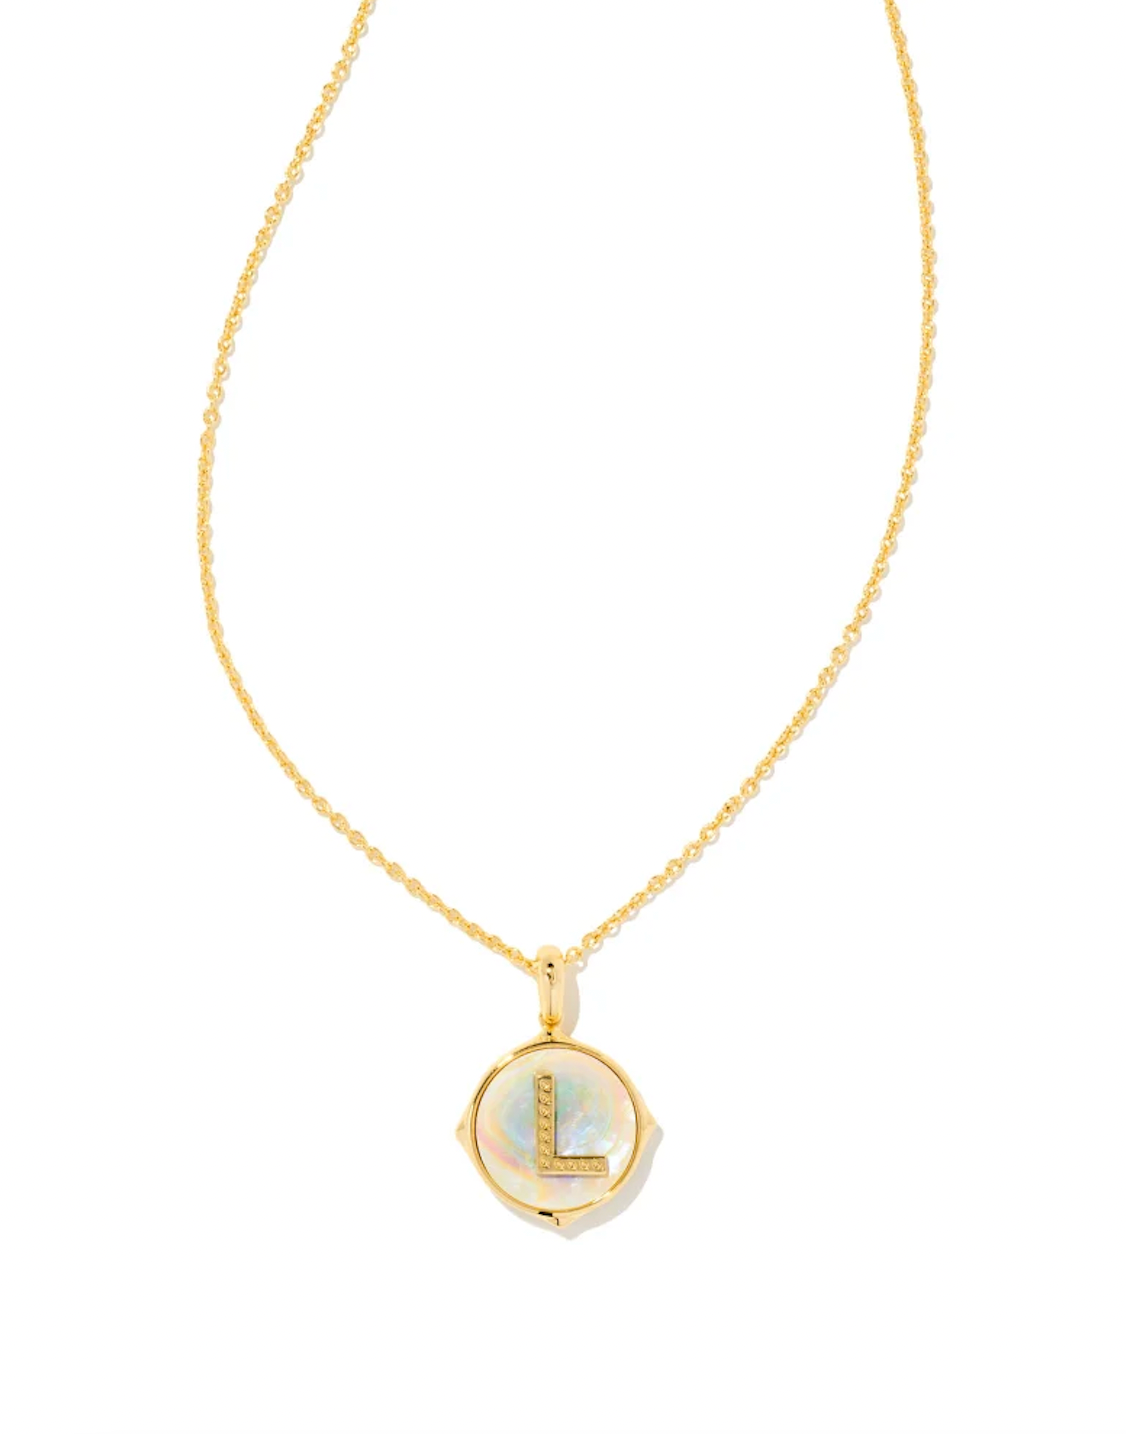 KENDRA SCOTTLETTER L DISC PENDENT NECKLACE GOLD IRIDESCENT ABALONE